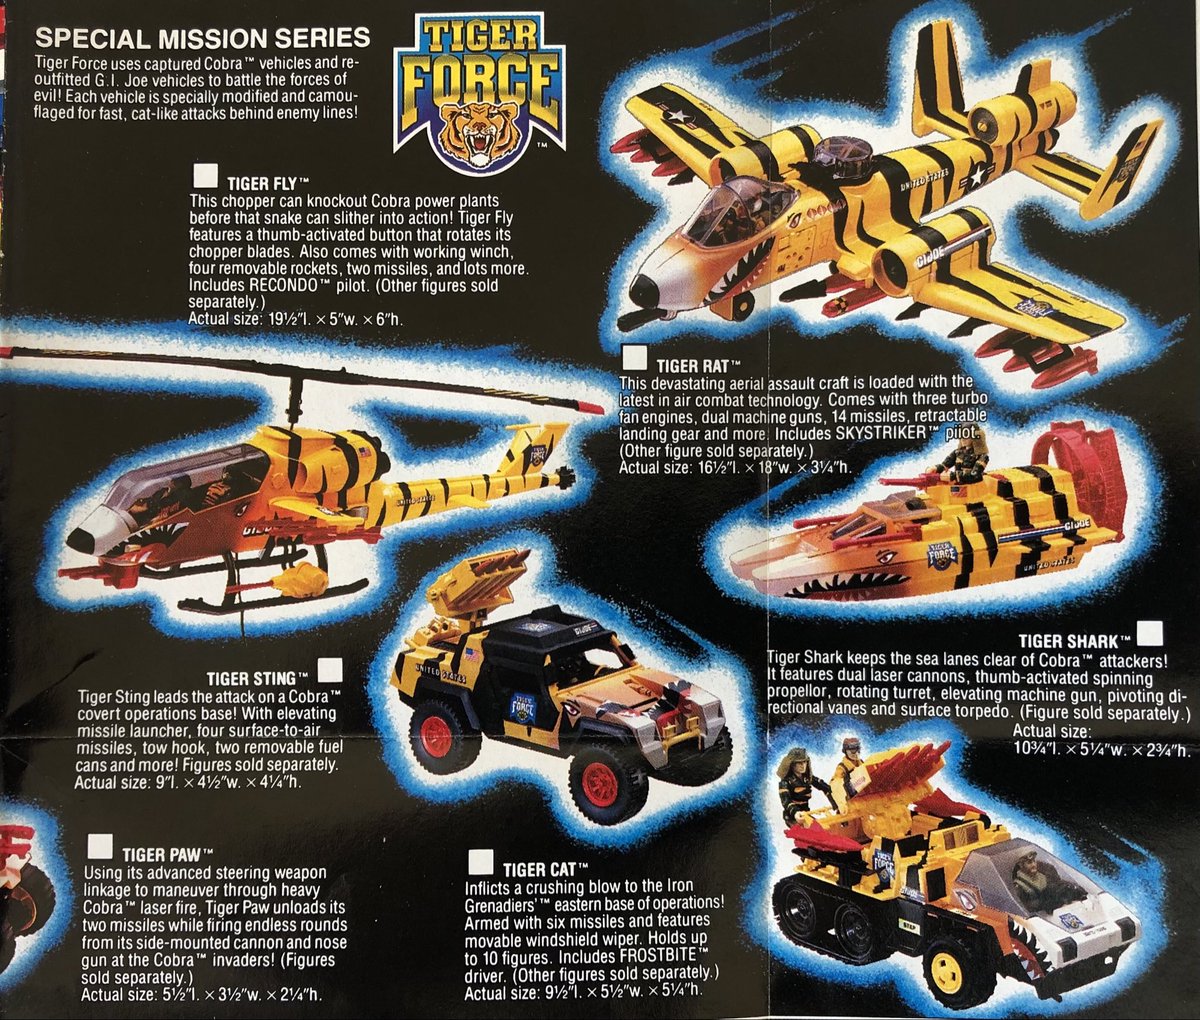 Here is the old #GiJoe insert catalog showing Tiger Force. I was not initially a huge fan of the repaints, but this gave kids and collectors a chance to get vehicles that had already been released a few years back.